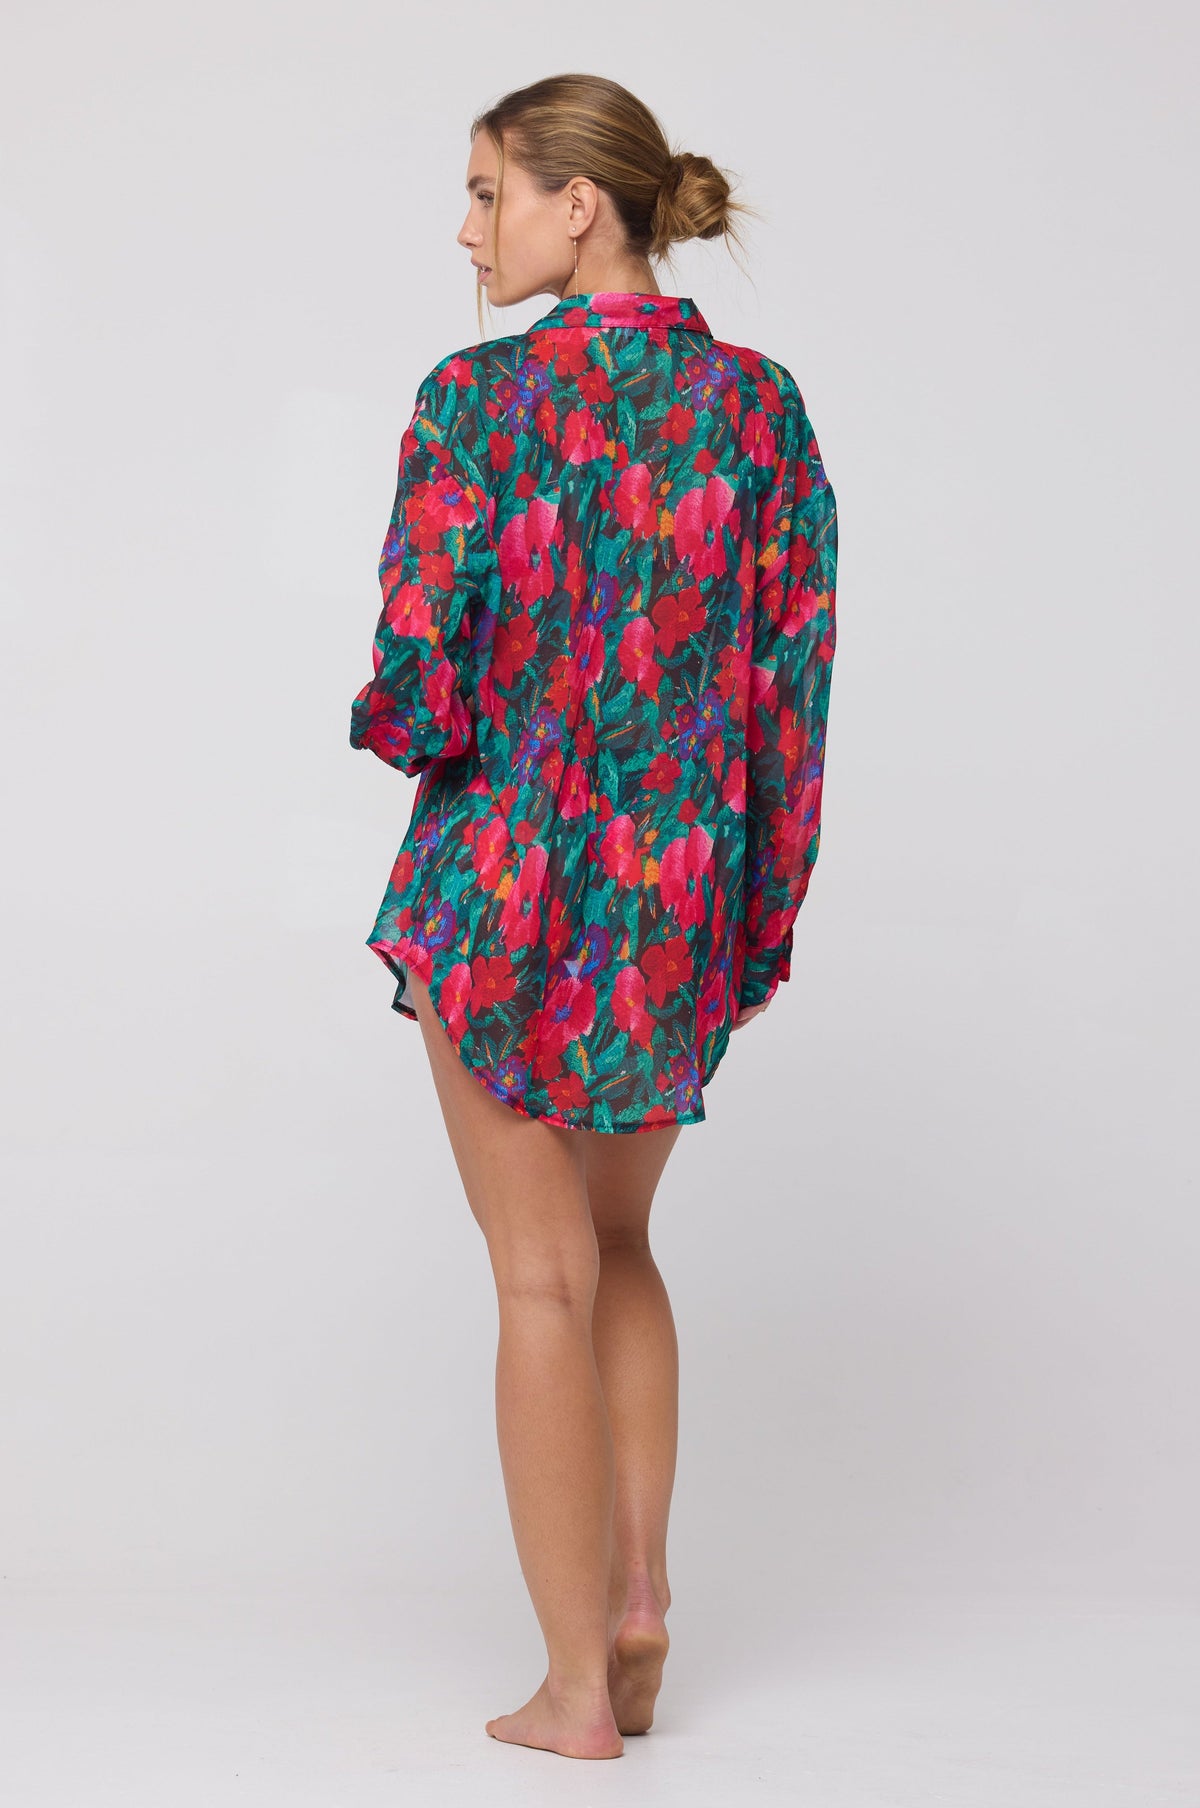 This is an image of Monica Chiffon Blouse in Resort - RESA featuring a model wearing the dress